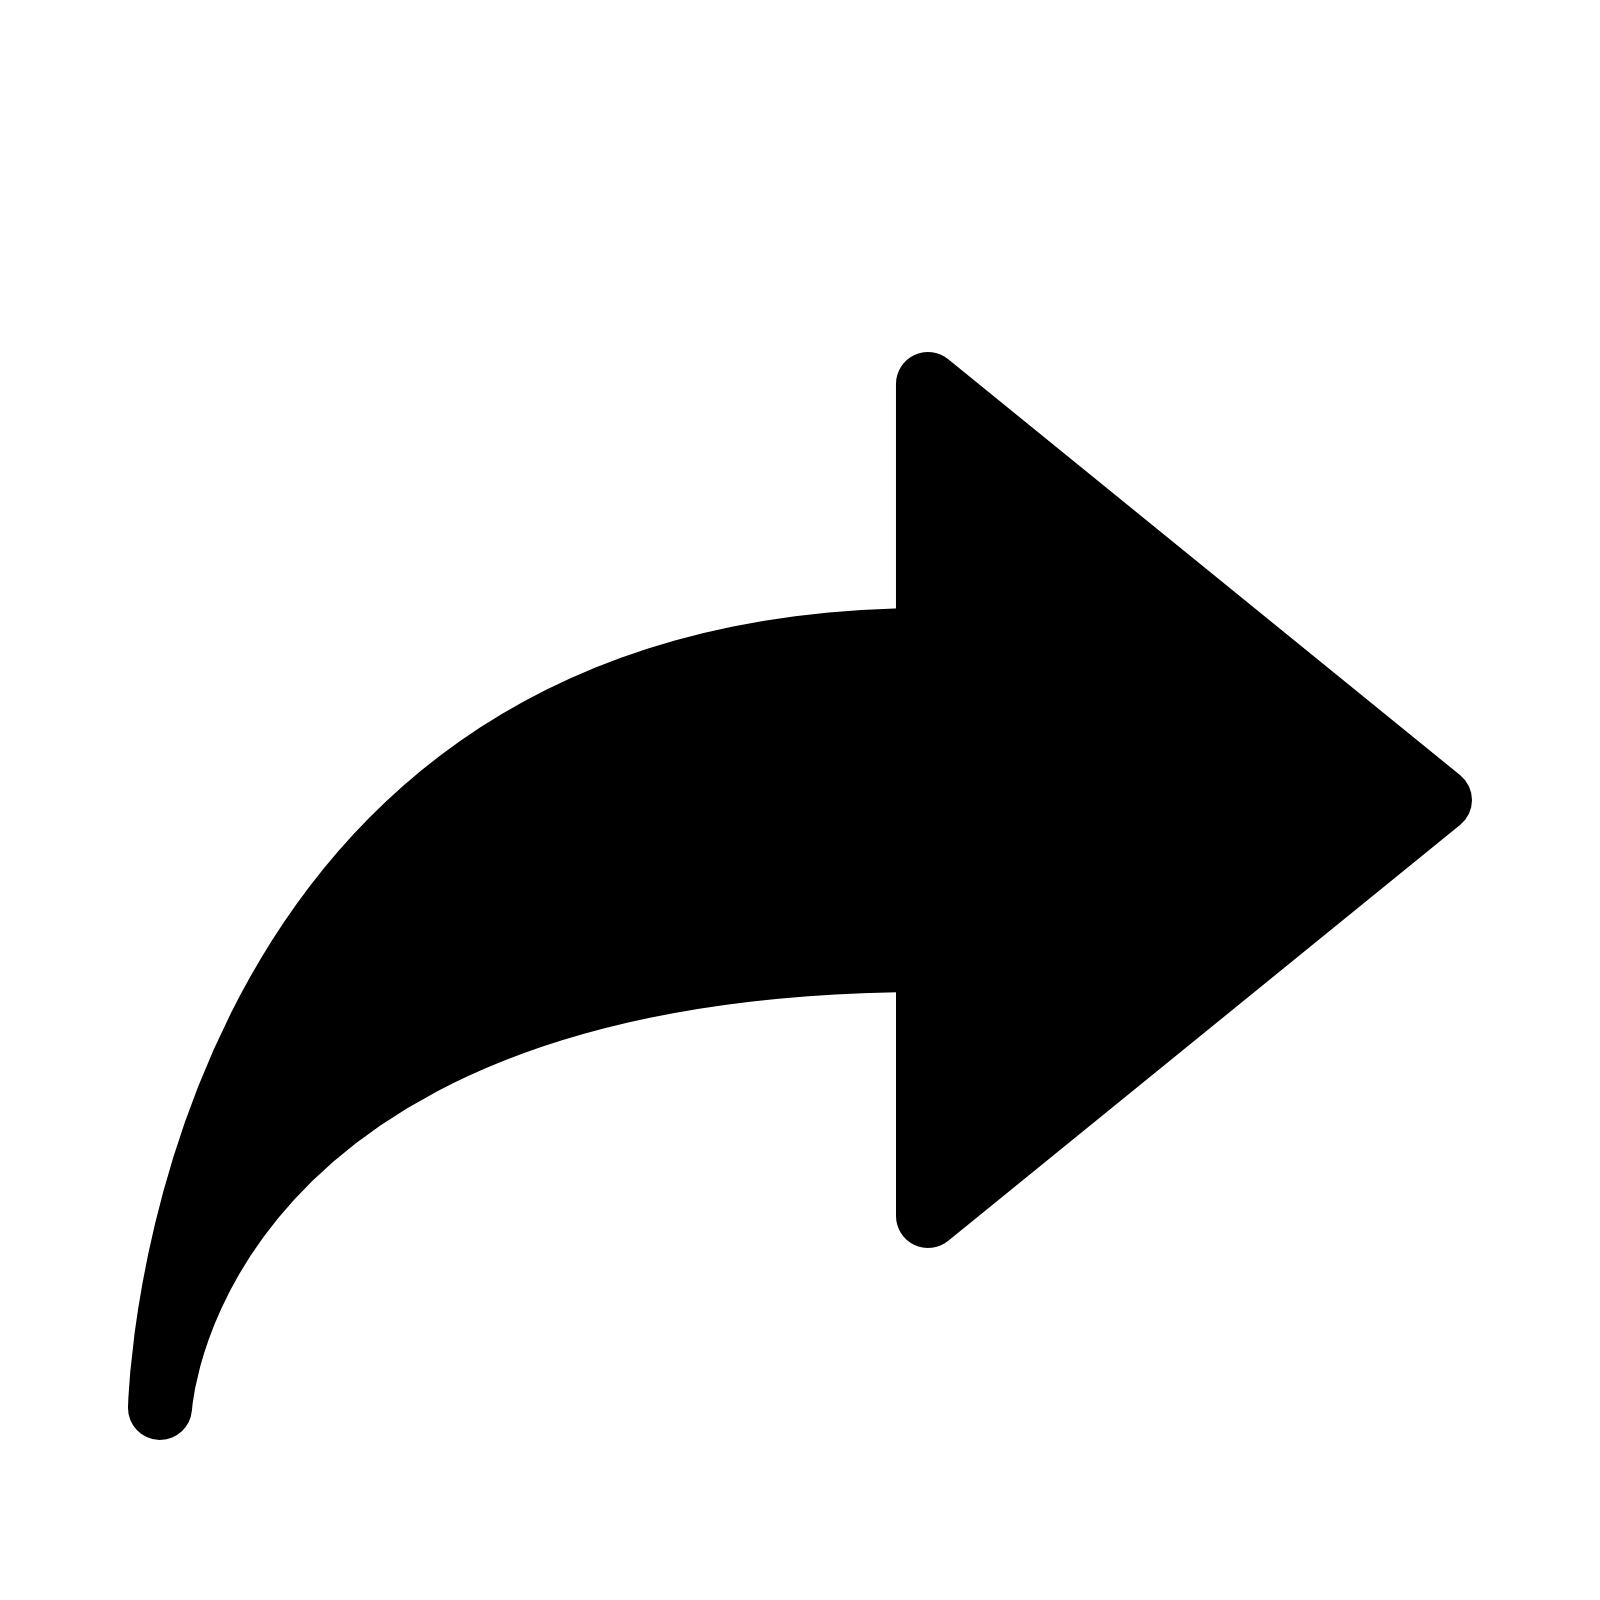 Forward Arrow Filled Icon   Arrow Png - Analy Repostera Vector, Transparent background PNG HD thumbnail